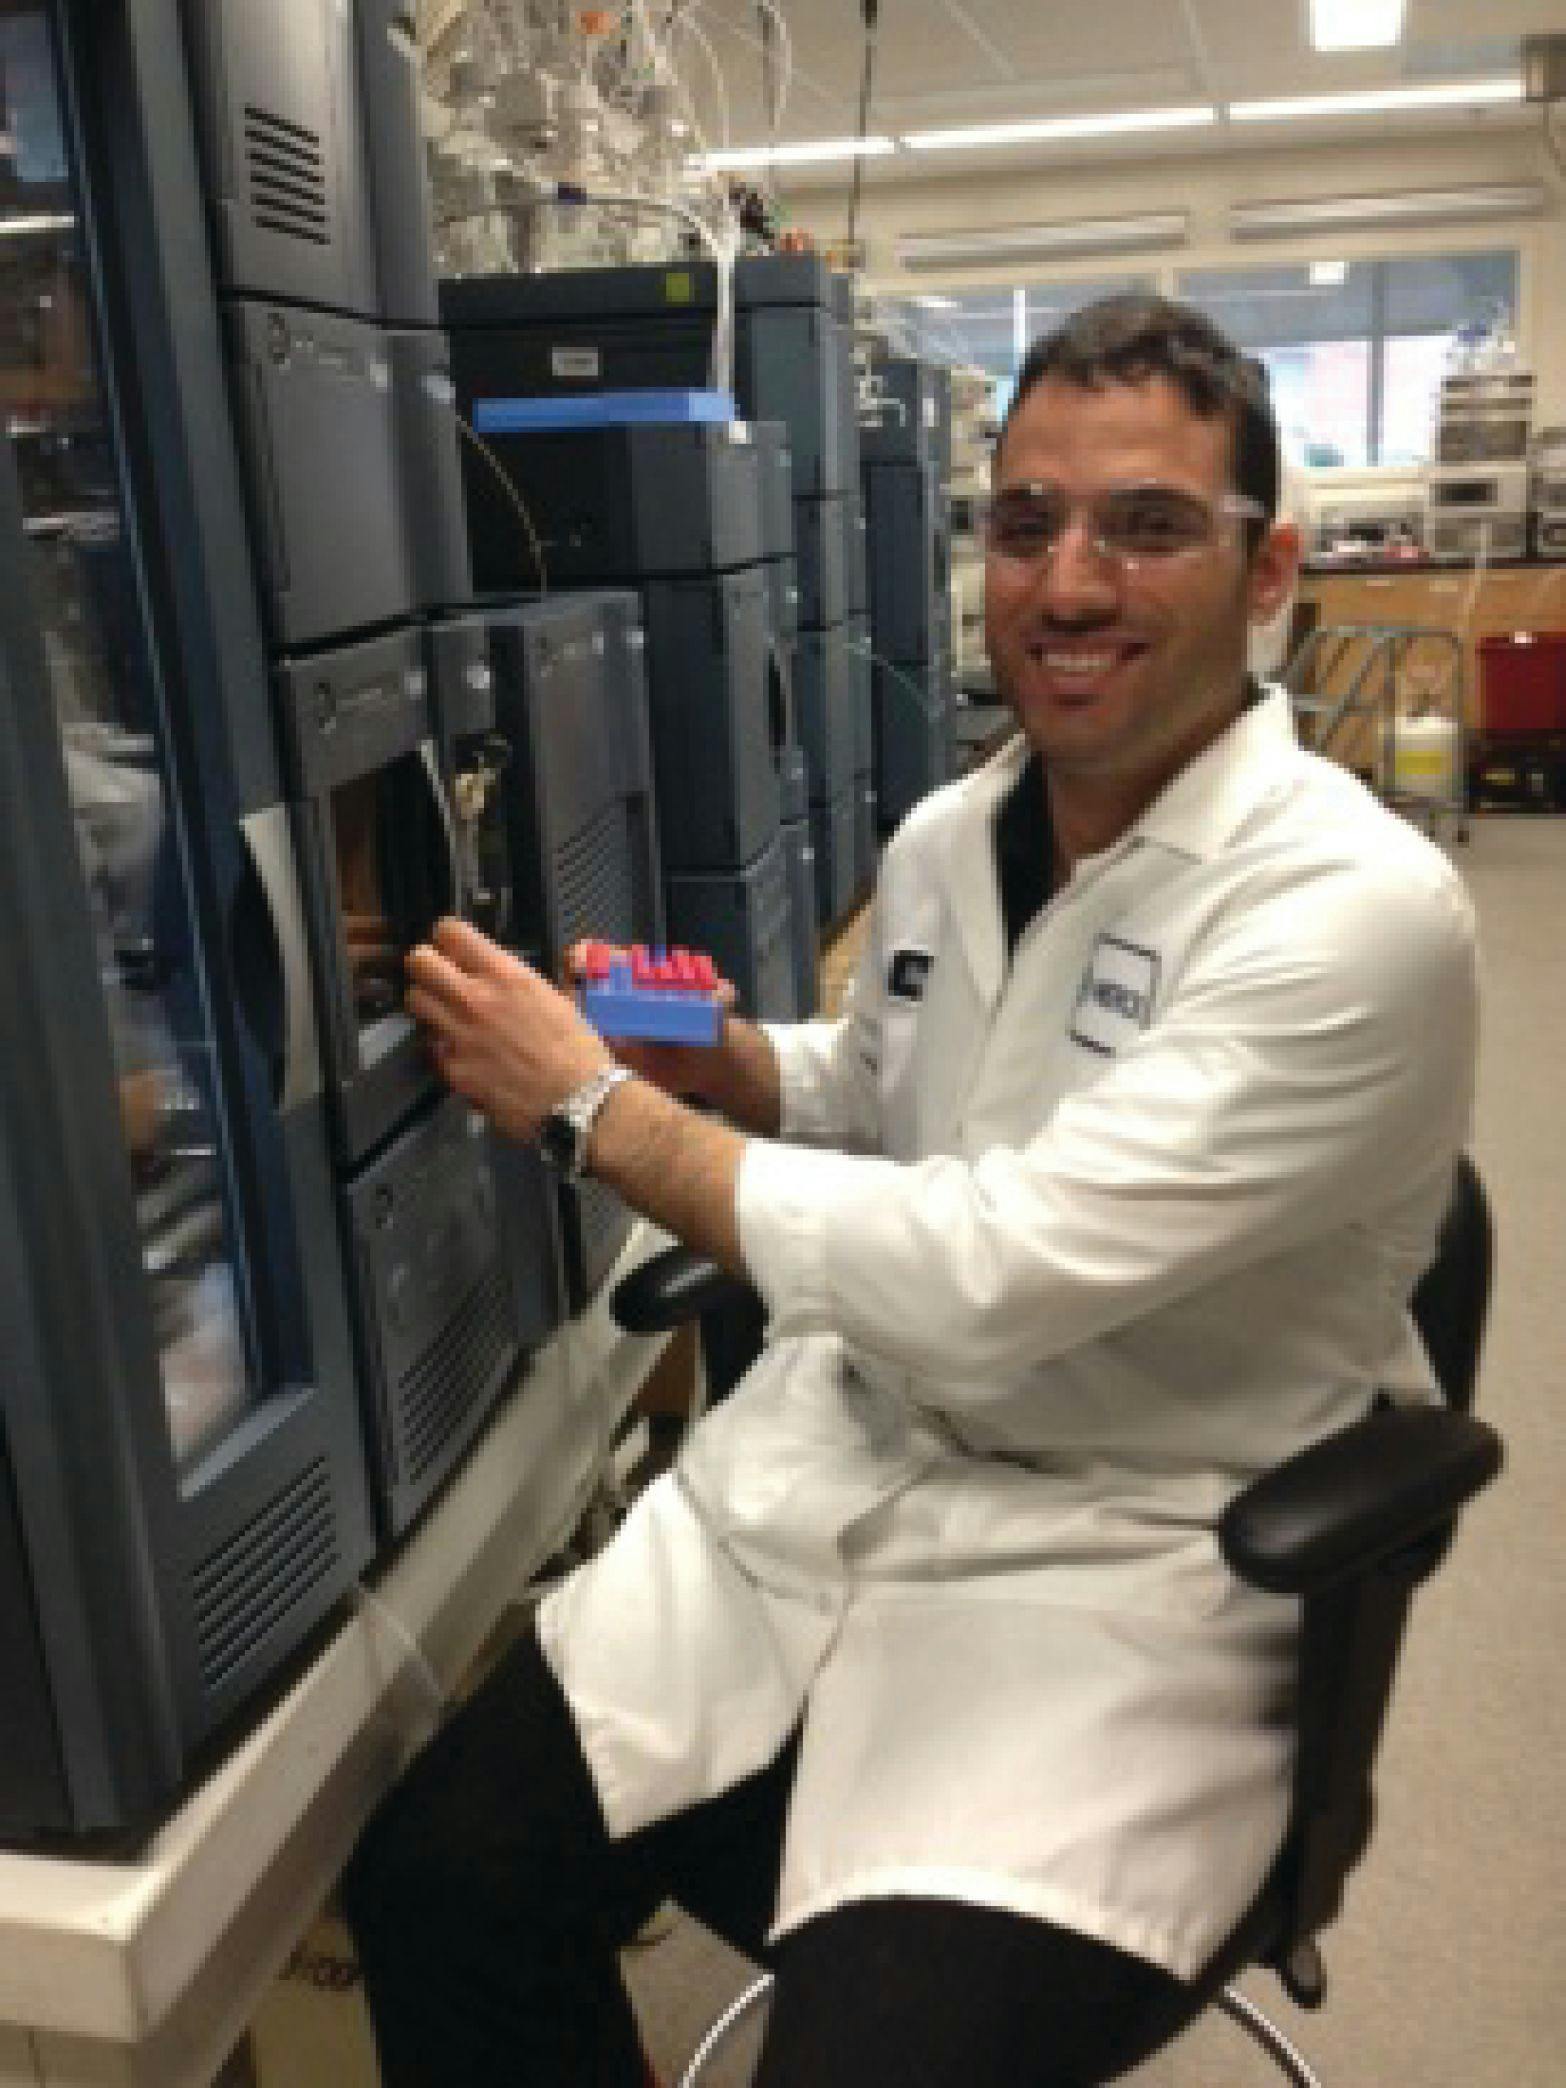 In 2015 Regalado won the award for the most publications of any Merck postdoctoral researcher. The plaque presented to him at the annual postdoc symposium was inscribed “Publication Monster,” featuring an image of Godzilla holding many manuscripts. During his first year as a postdoctoral fellow, Erik contributed to the publication of 18 impactful articles, which included contributing to a publication in the journal Science. Comments and image courtesy of Alexey A. Makarov and Robert Hartman, respectively.